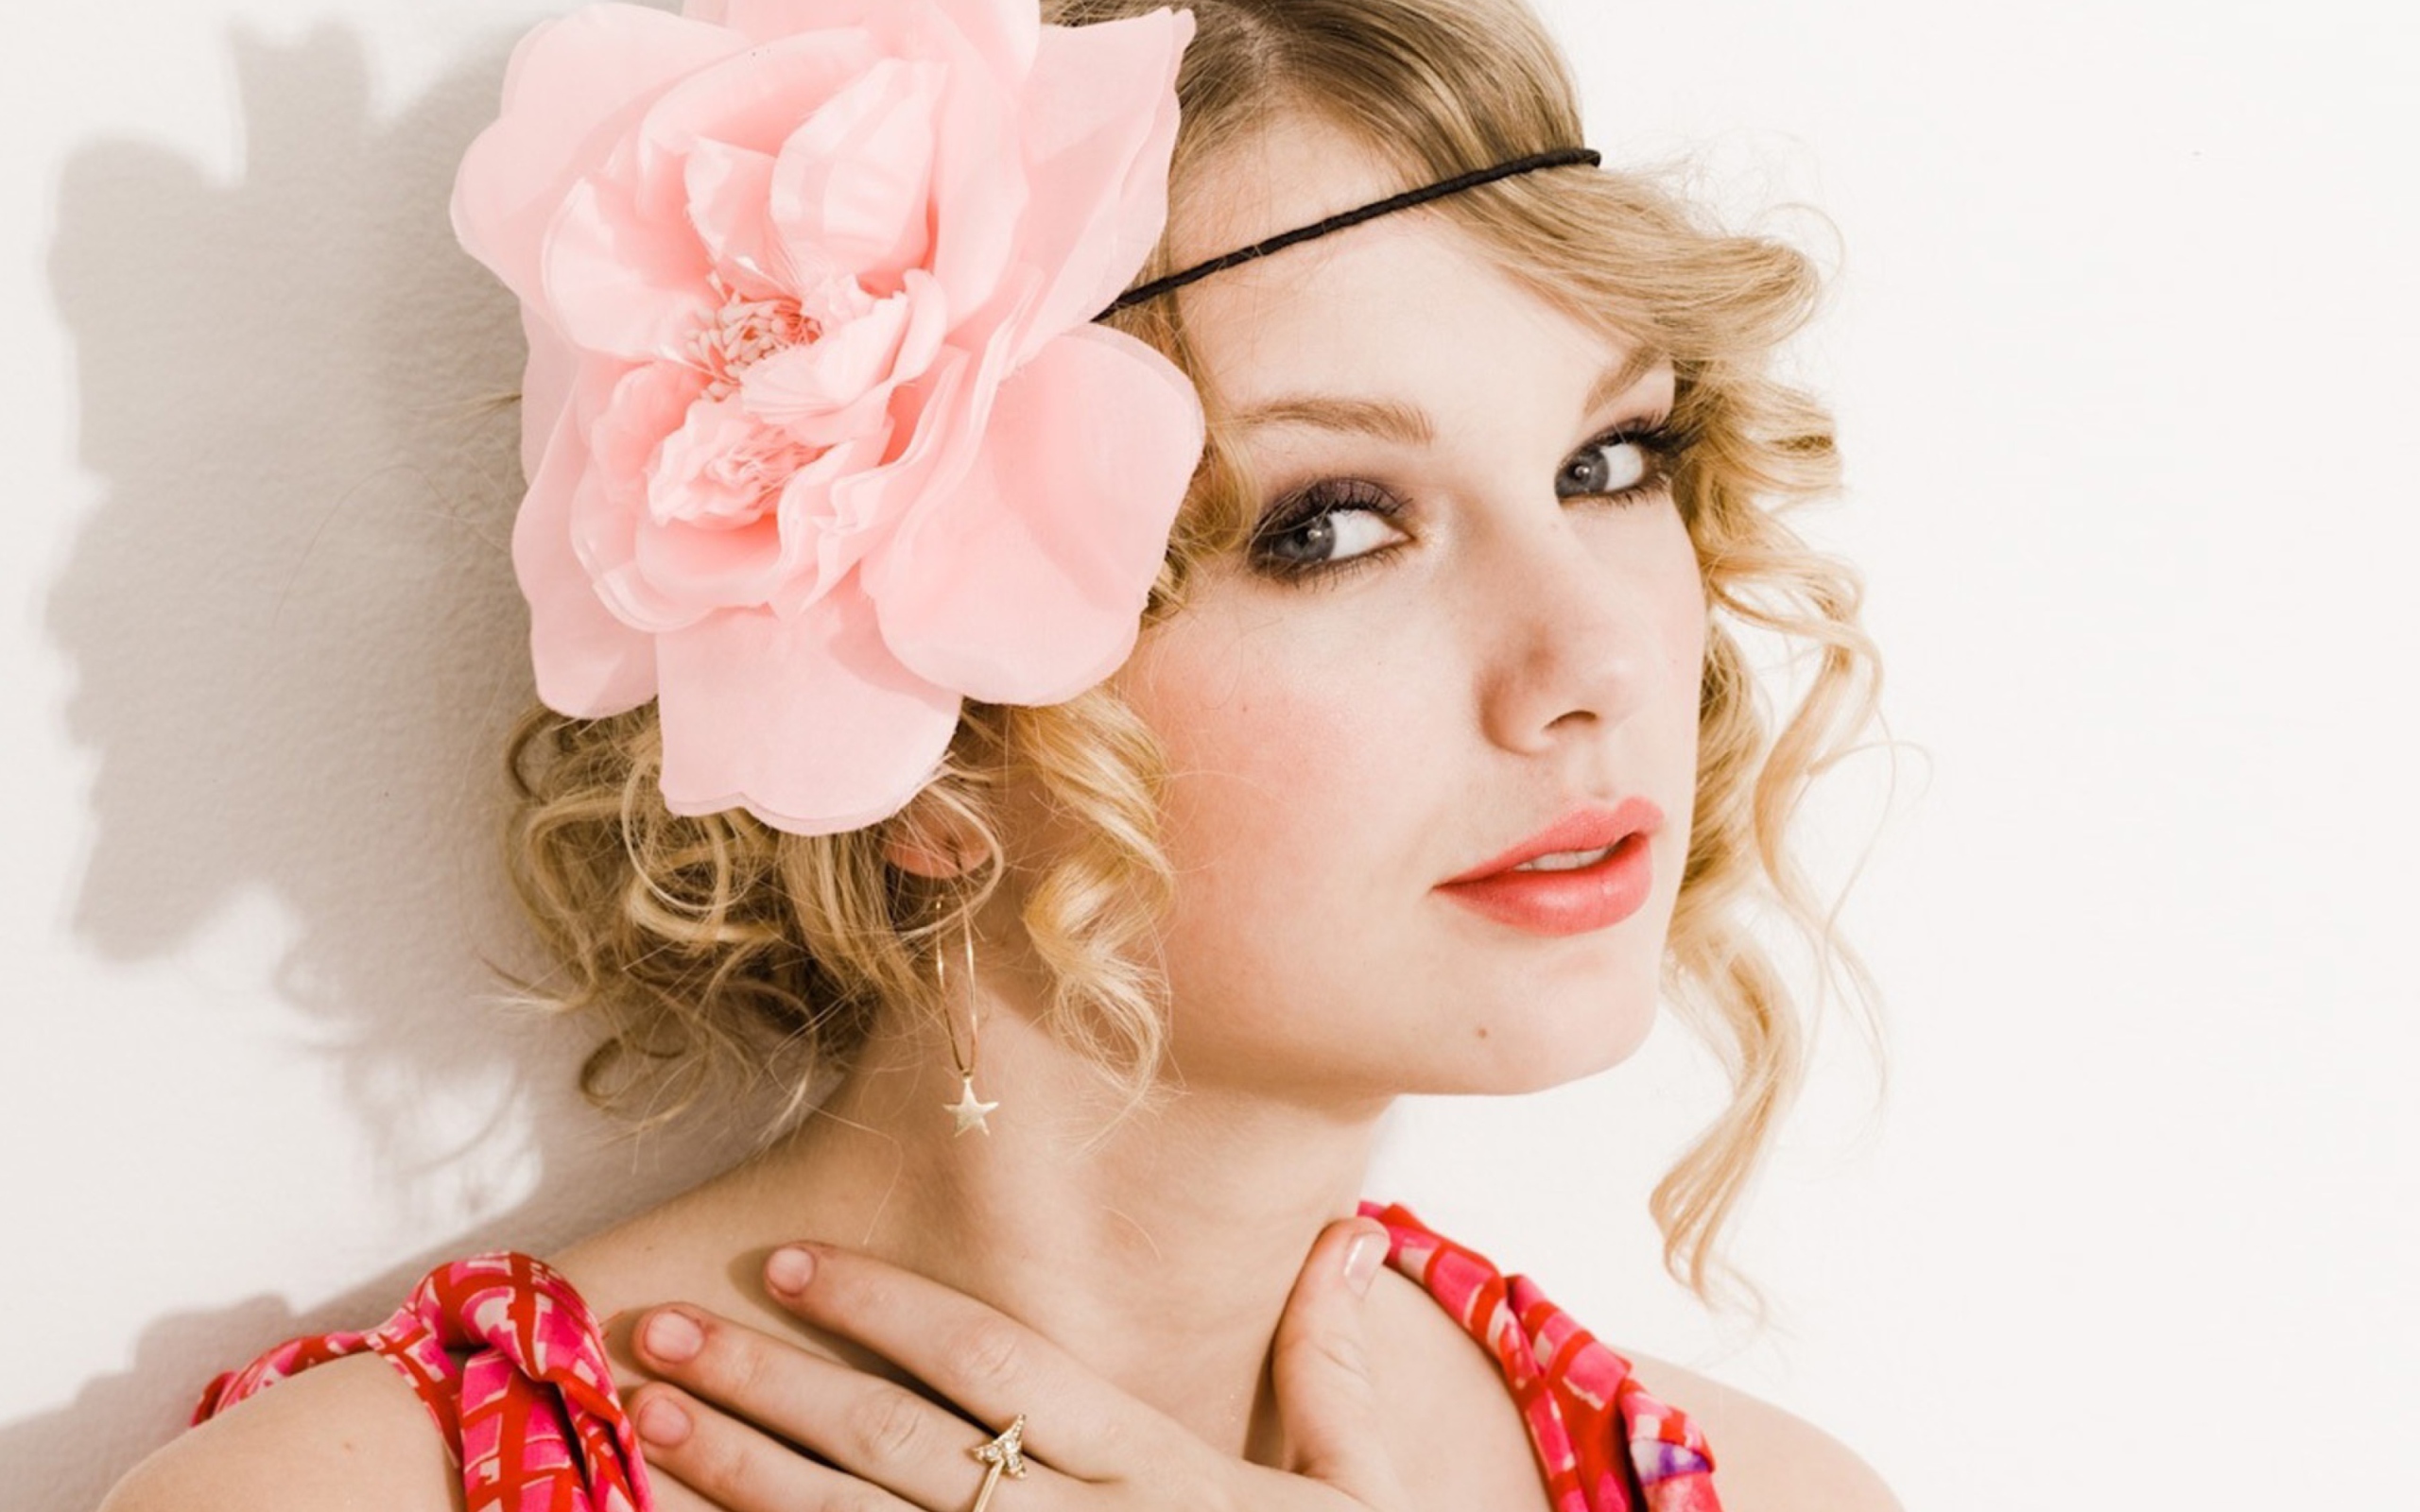 Taylor Swift With Pink Rose On Head wallpaper 2560x1600